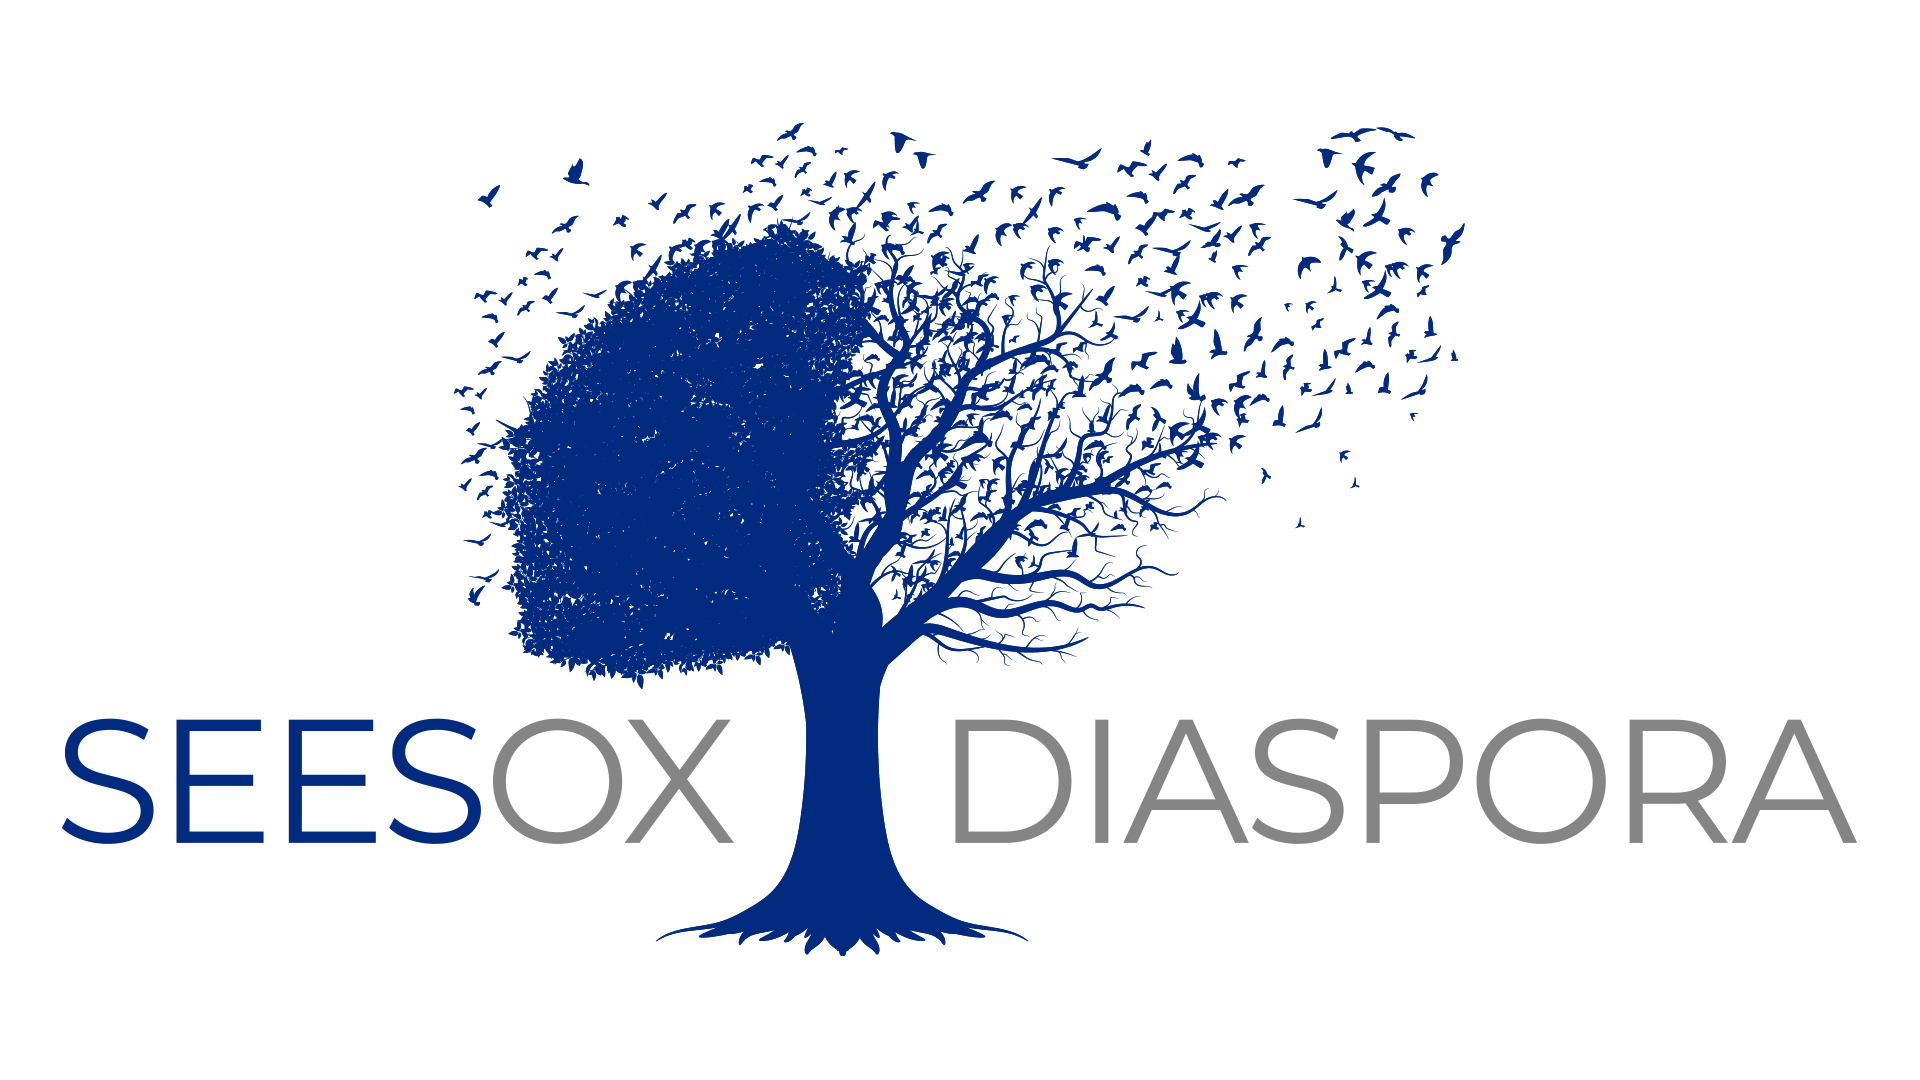 Diaspora philanthropy and volunteerism as a contestable process: Tracing connections and disconnections between diaspora and homeland in the Greek education sector